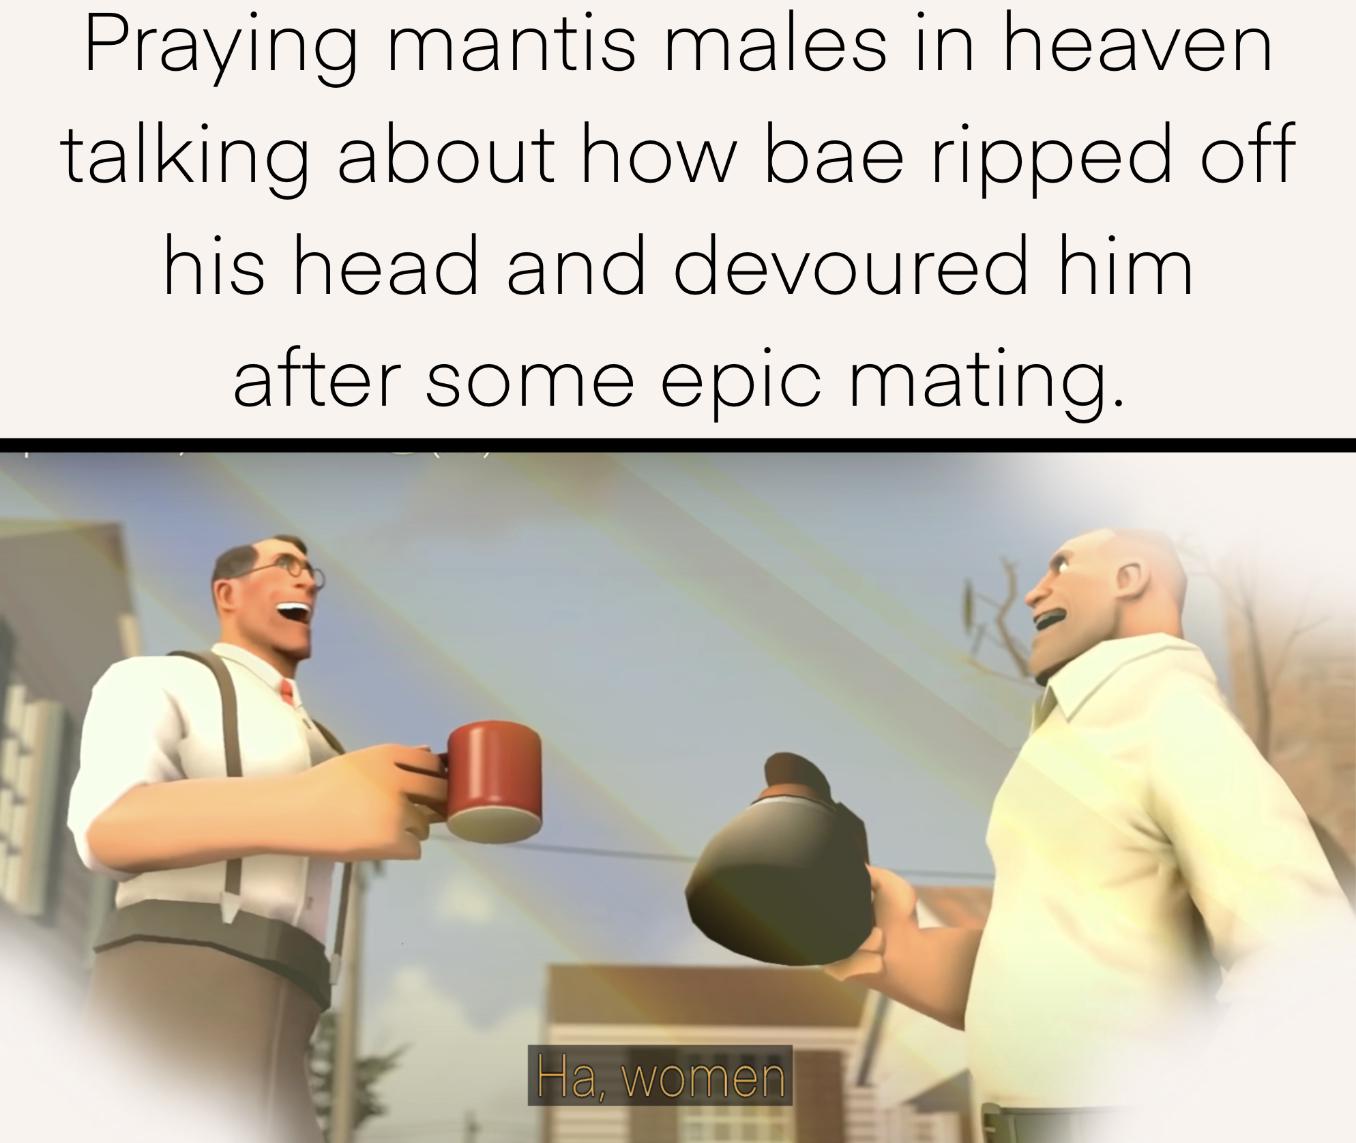 dank memes - women hahaha - Praying mantis males in heaven talking about how bae ripped off his head and devoured him after some epic mating. Ha, women